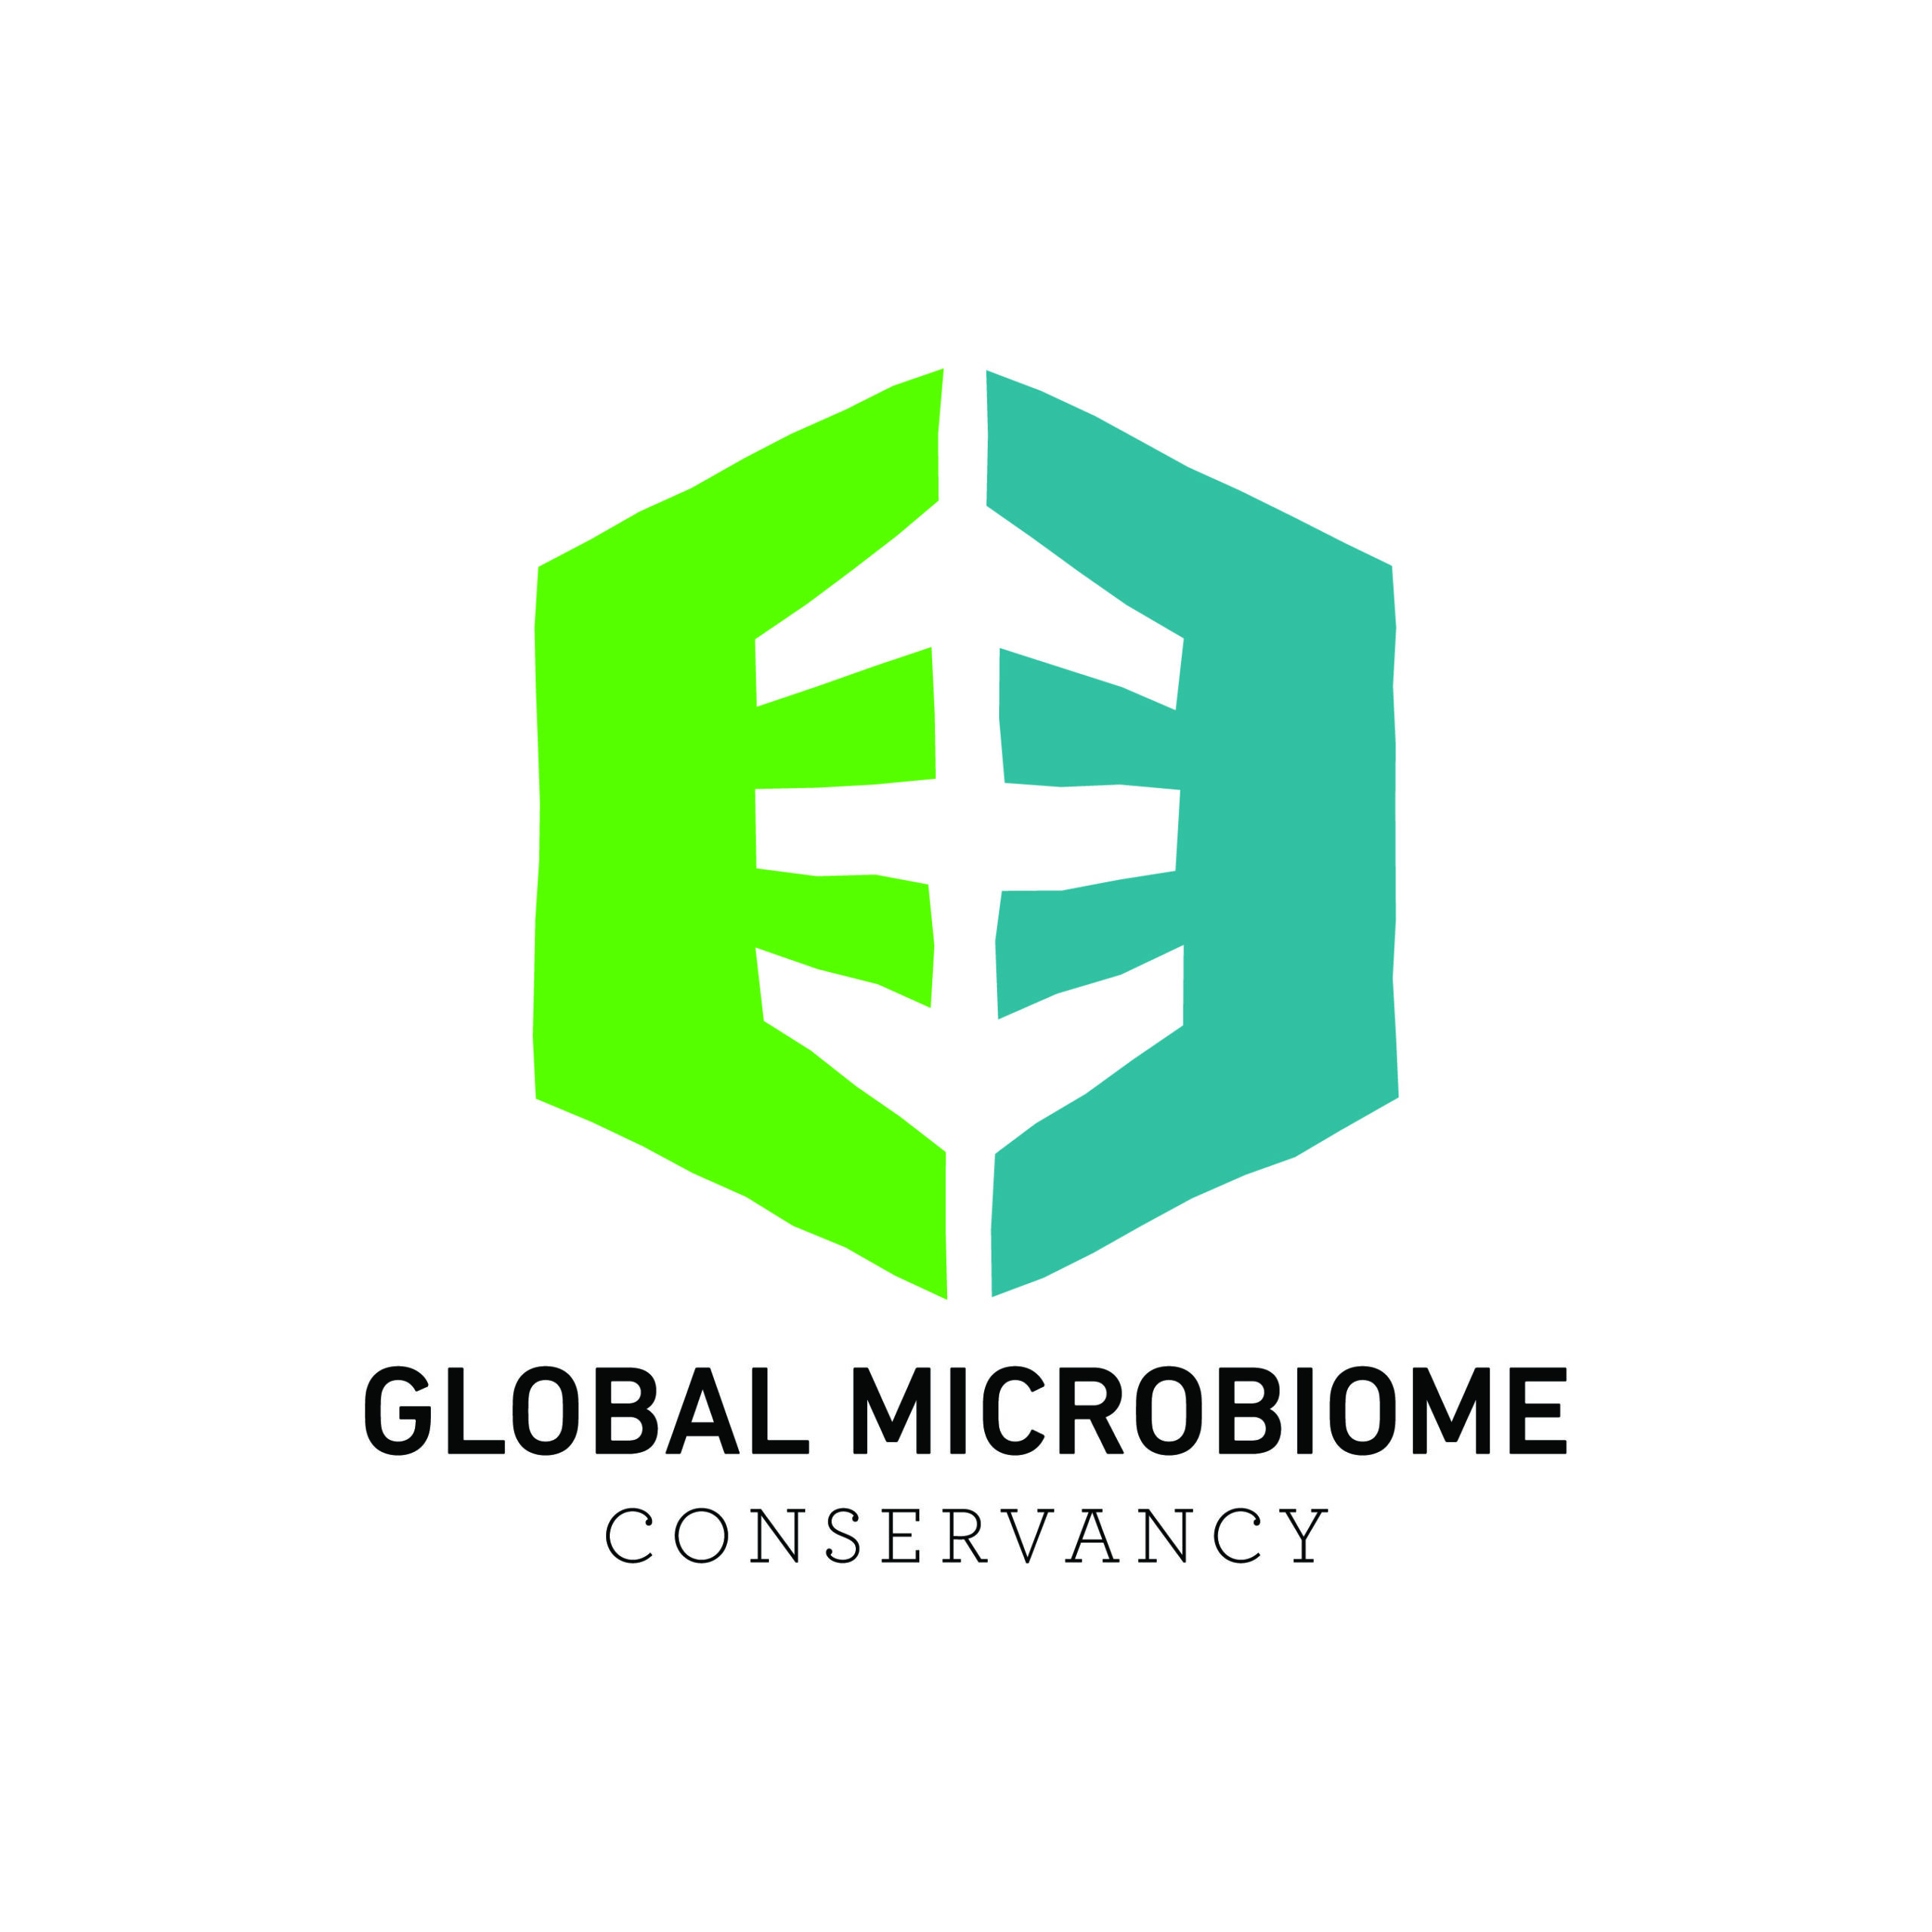 Logo of the Global Microbiome Conservancy